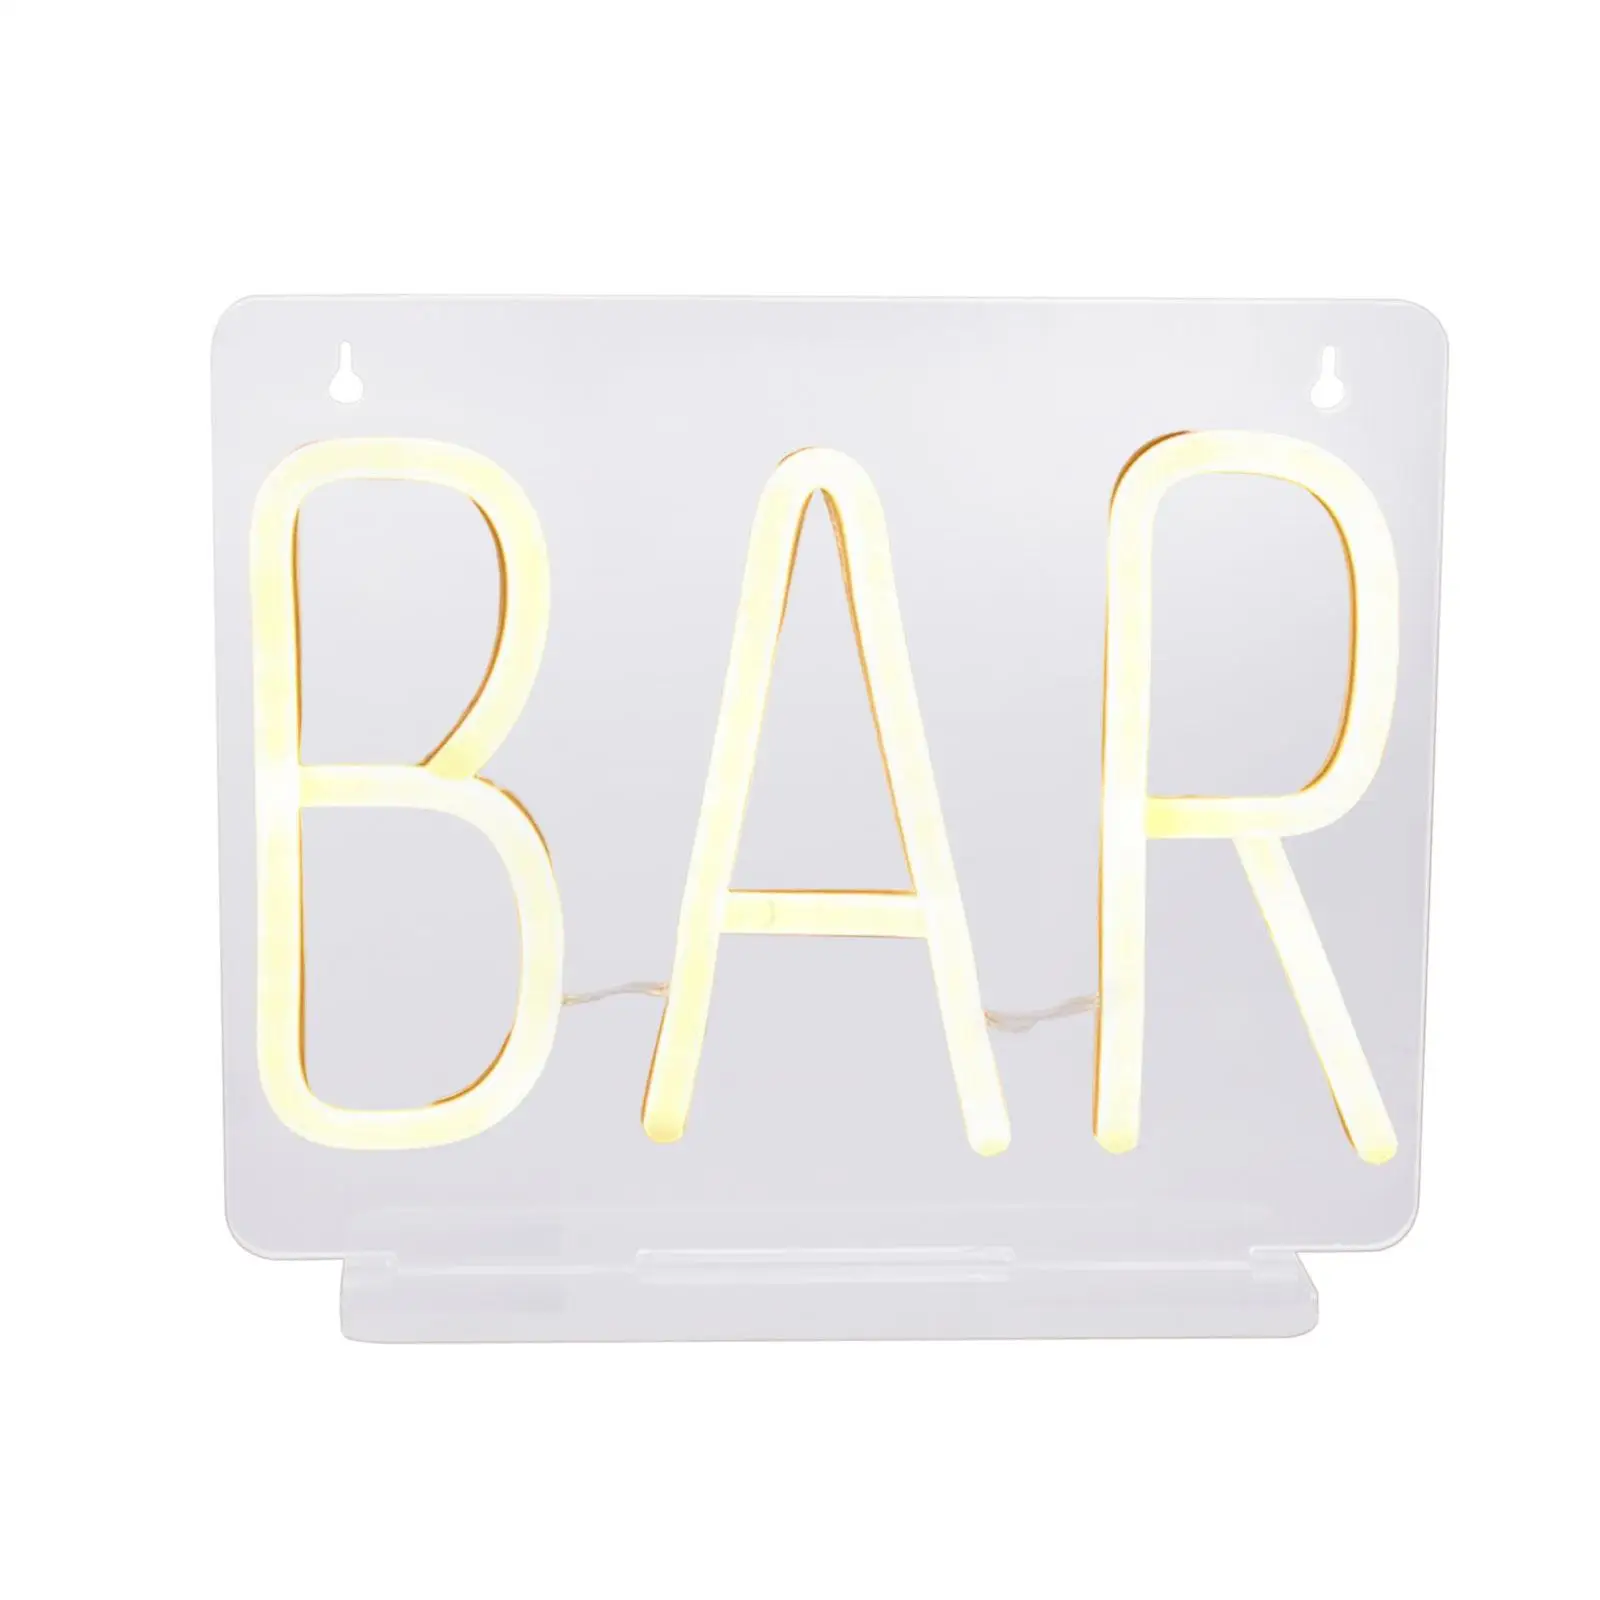 Bar LED Signs Lights Neon Sign Decoration Wall Hanging or Free Standing 1.5M Cable Bar Pub Home Party Decorative Lighting